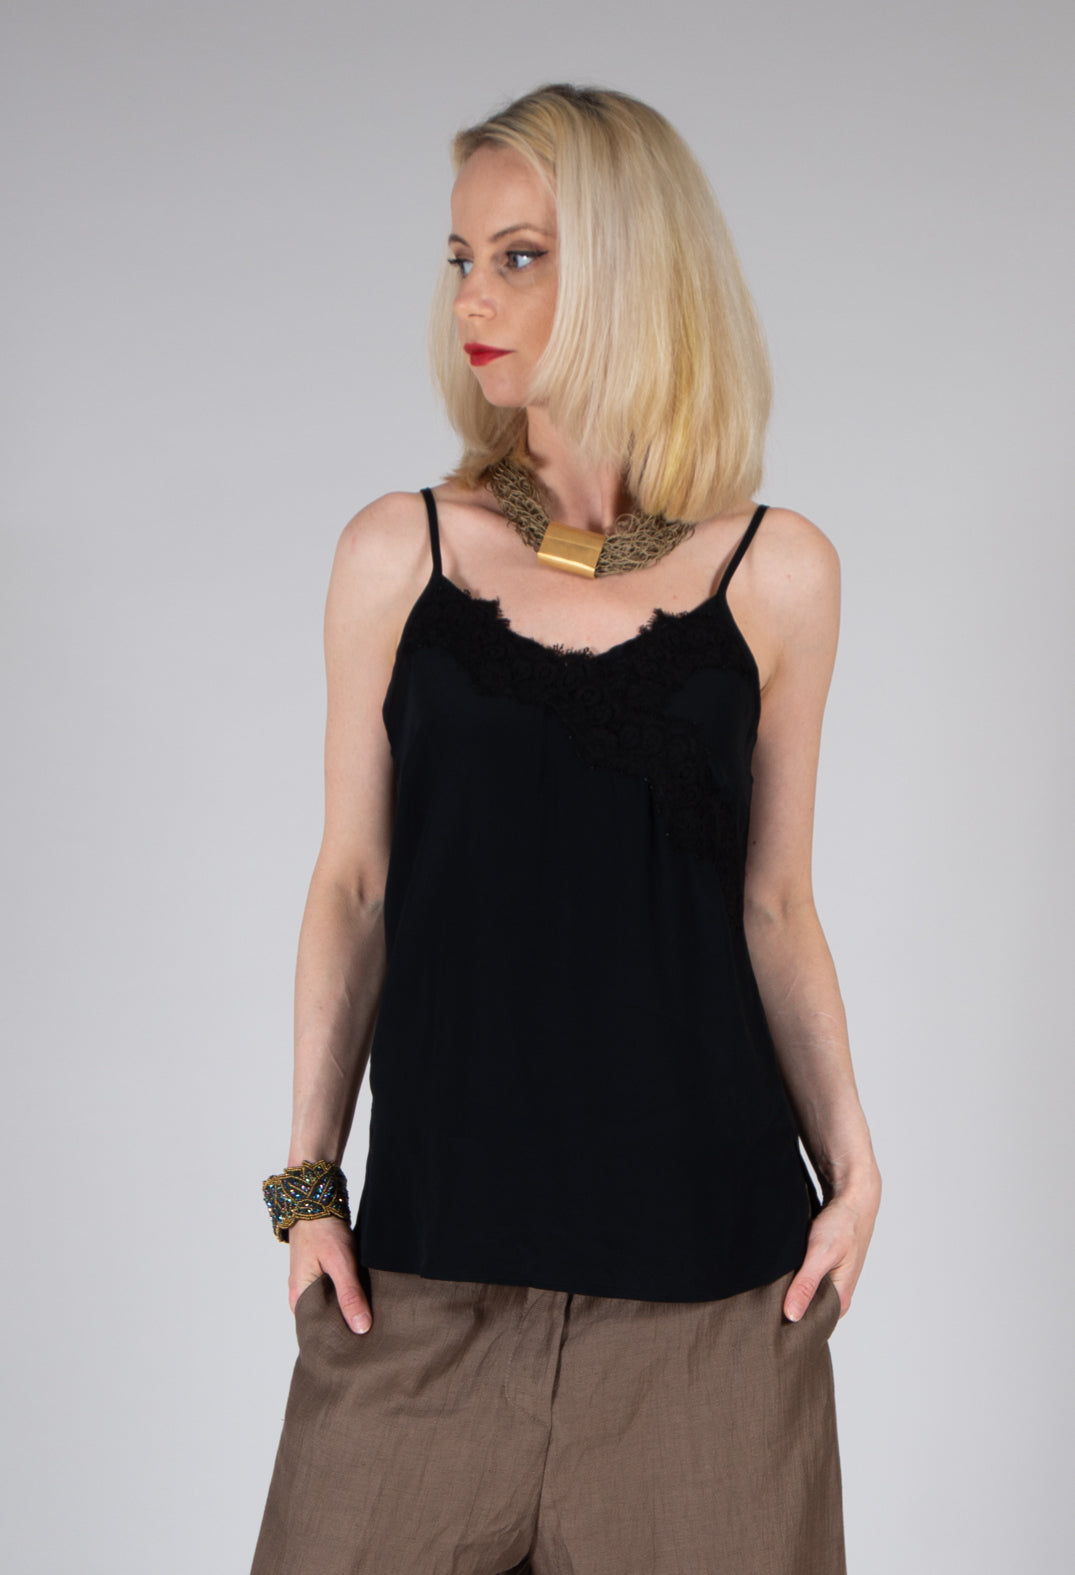 lady wearing a lace cami top in black